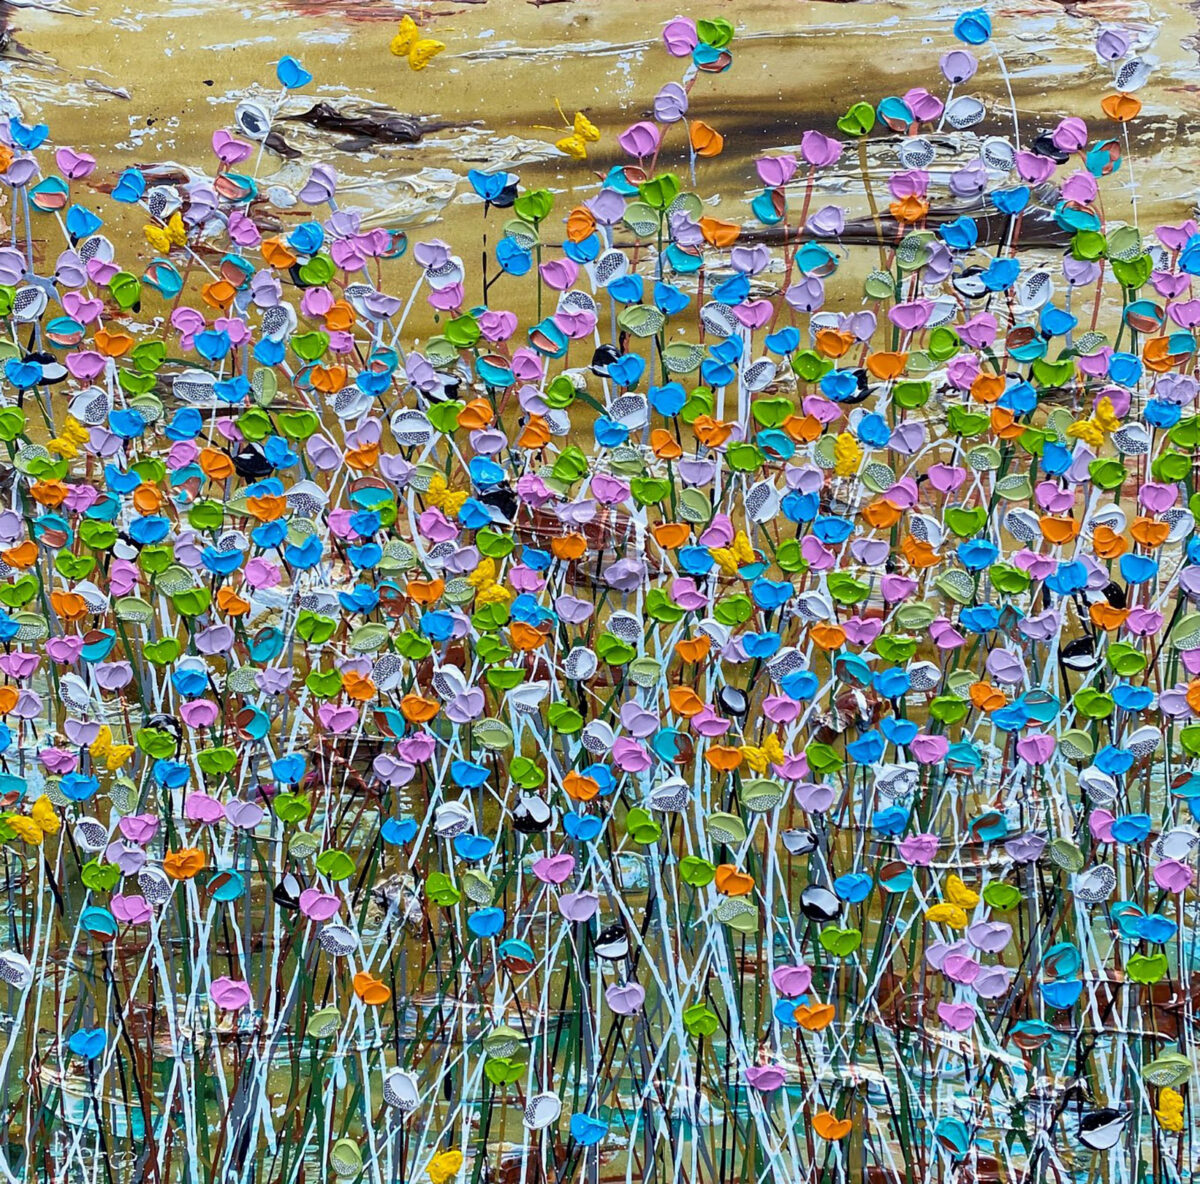 Outback Confetti 122 x 122cm acrylic and ink on canvsa $ 5,600.00